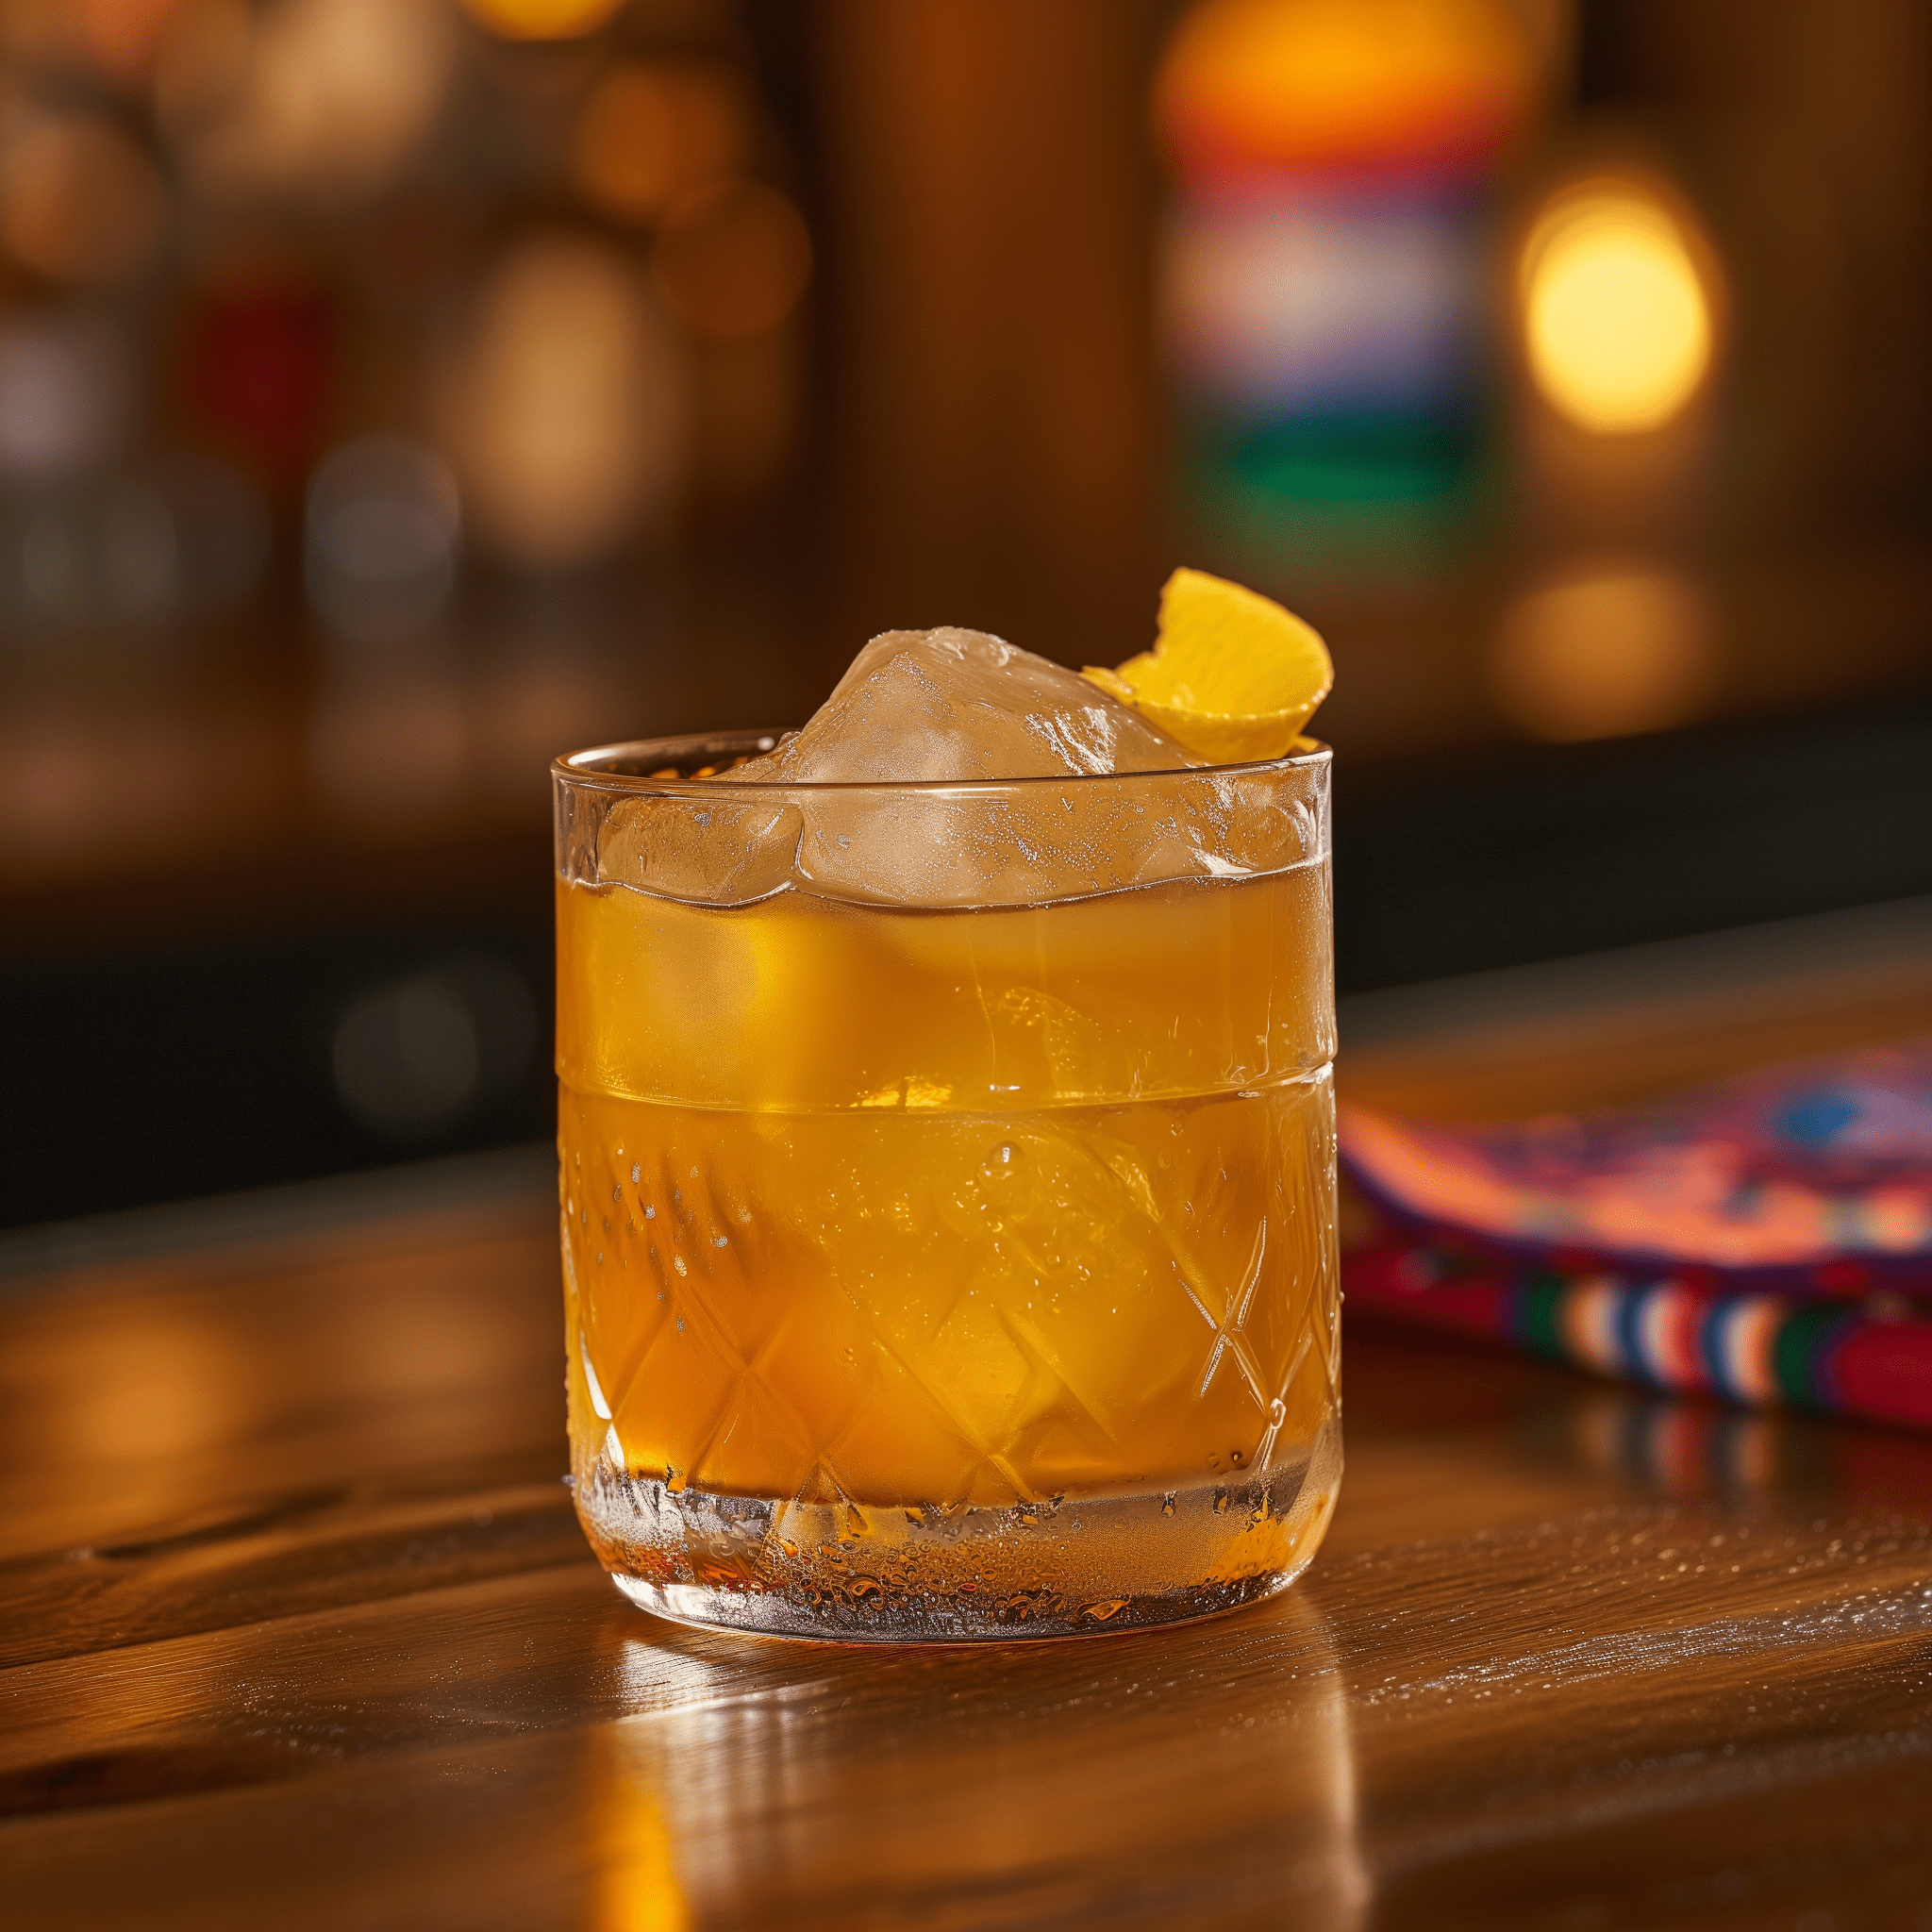 Medicina Latina Cocktail Recipe - The Medicina Latina offers a complex flavor profile. It's refreshingly sour from the lime juice, with a sweet and spicy kick from the honey and ginger syrups. The tequila provides a strong, earthy base, while the mezcal adds a subtle smoky note to the finish.